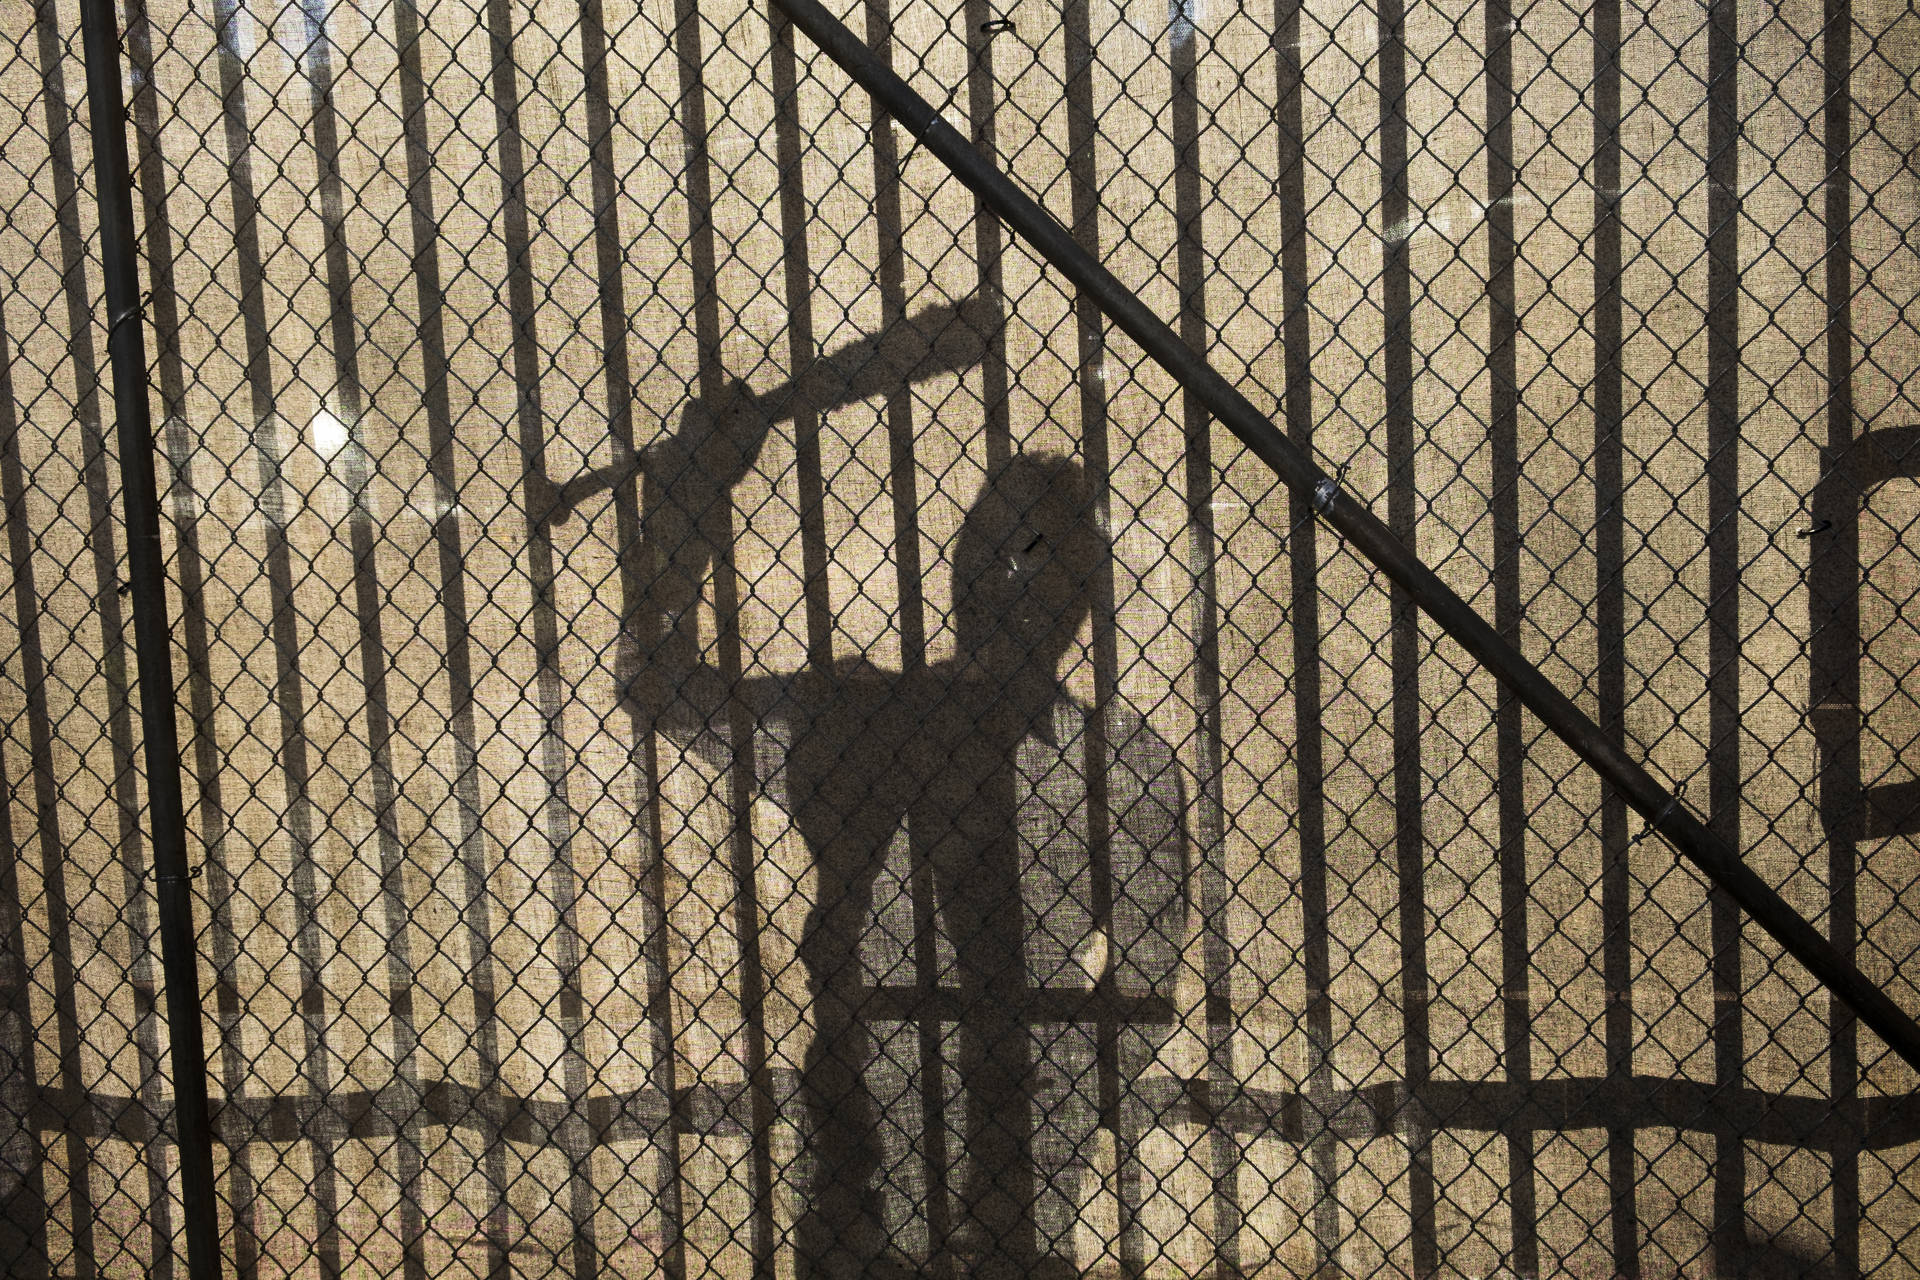 Negan's Shadow Against A Fence Wallpaper